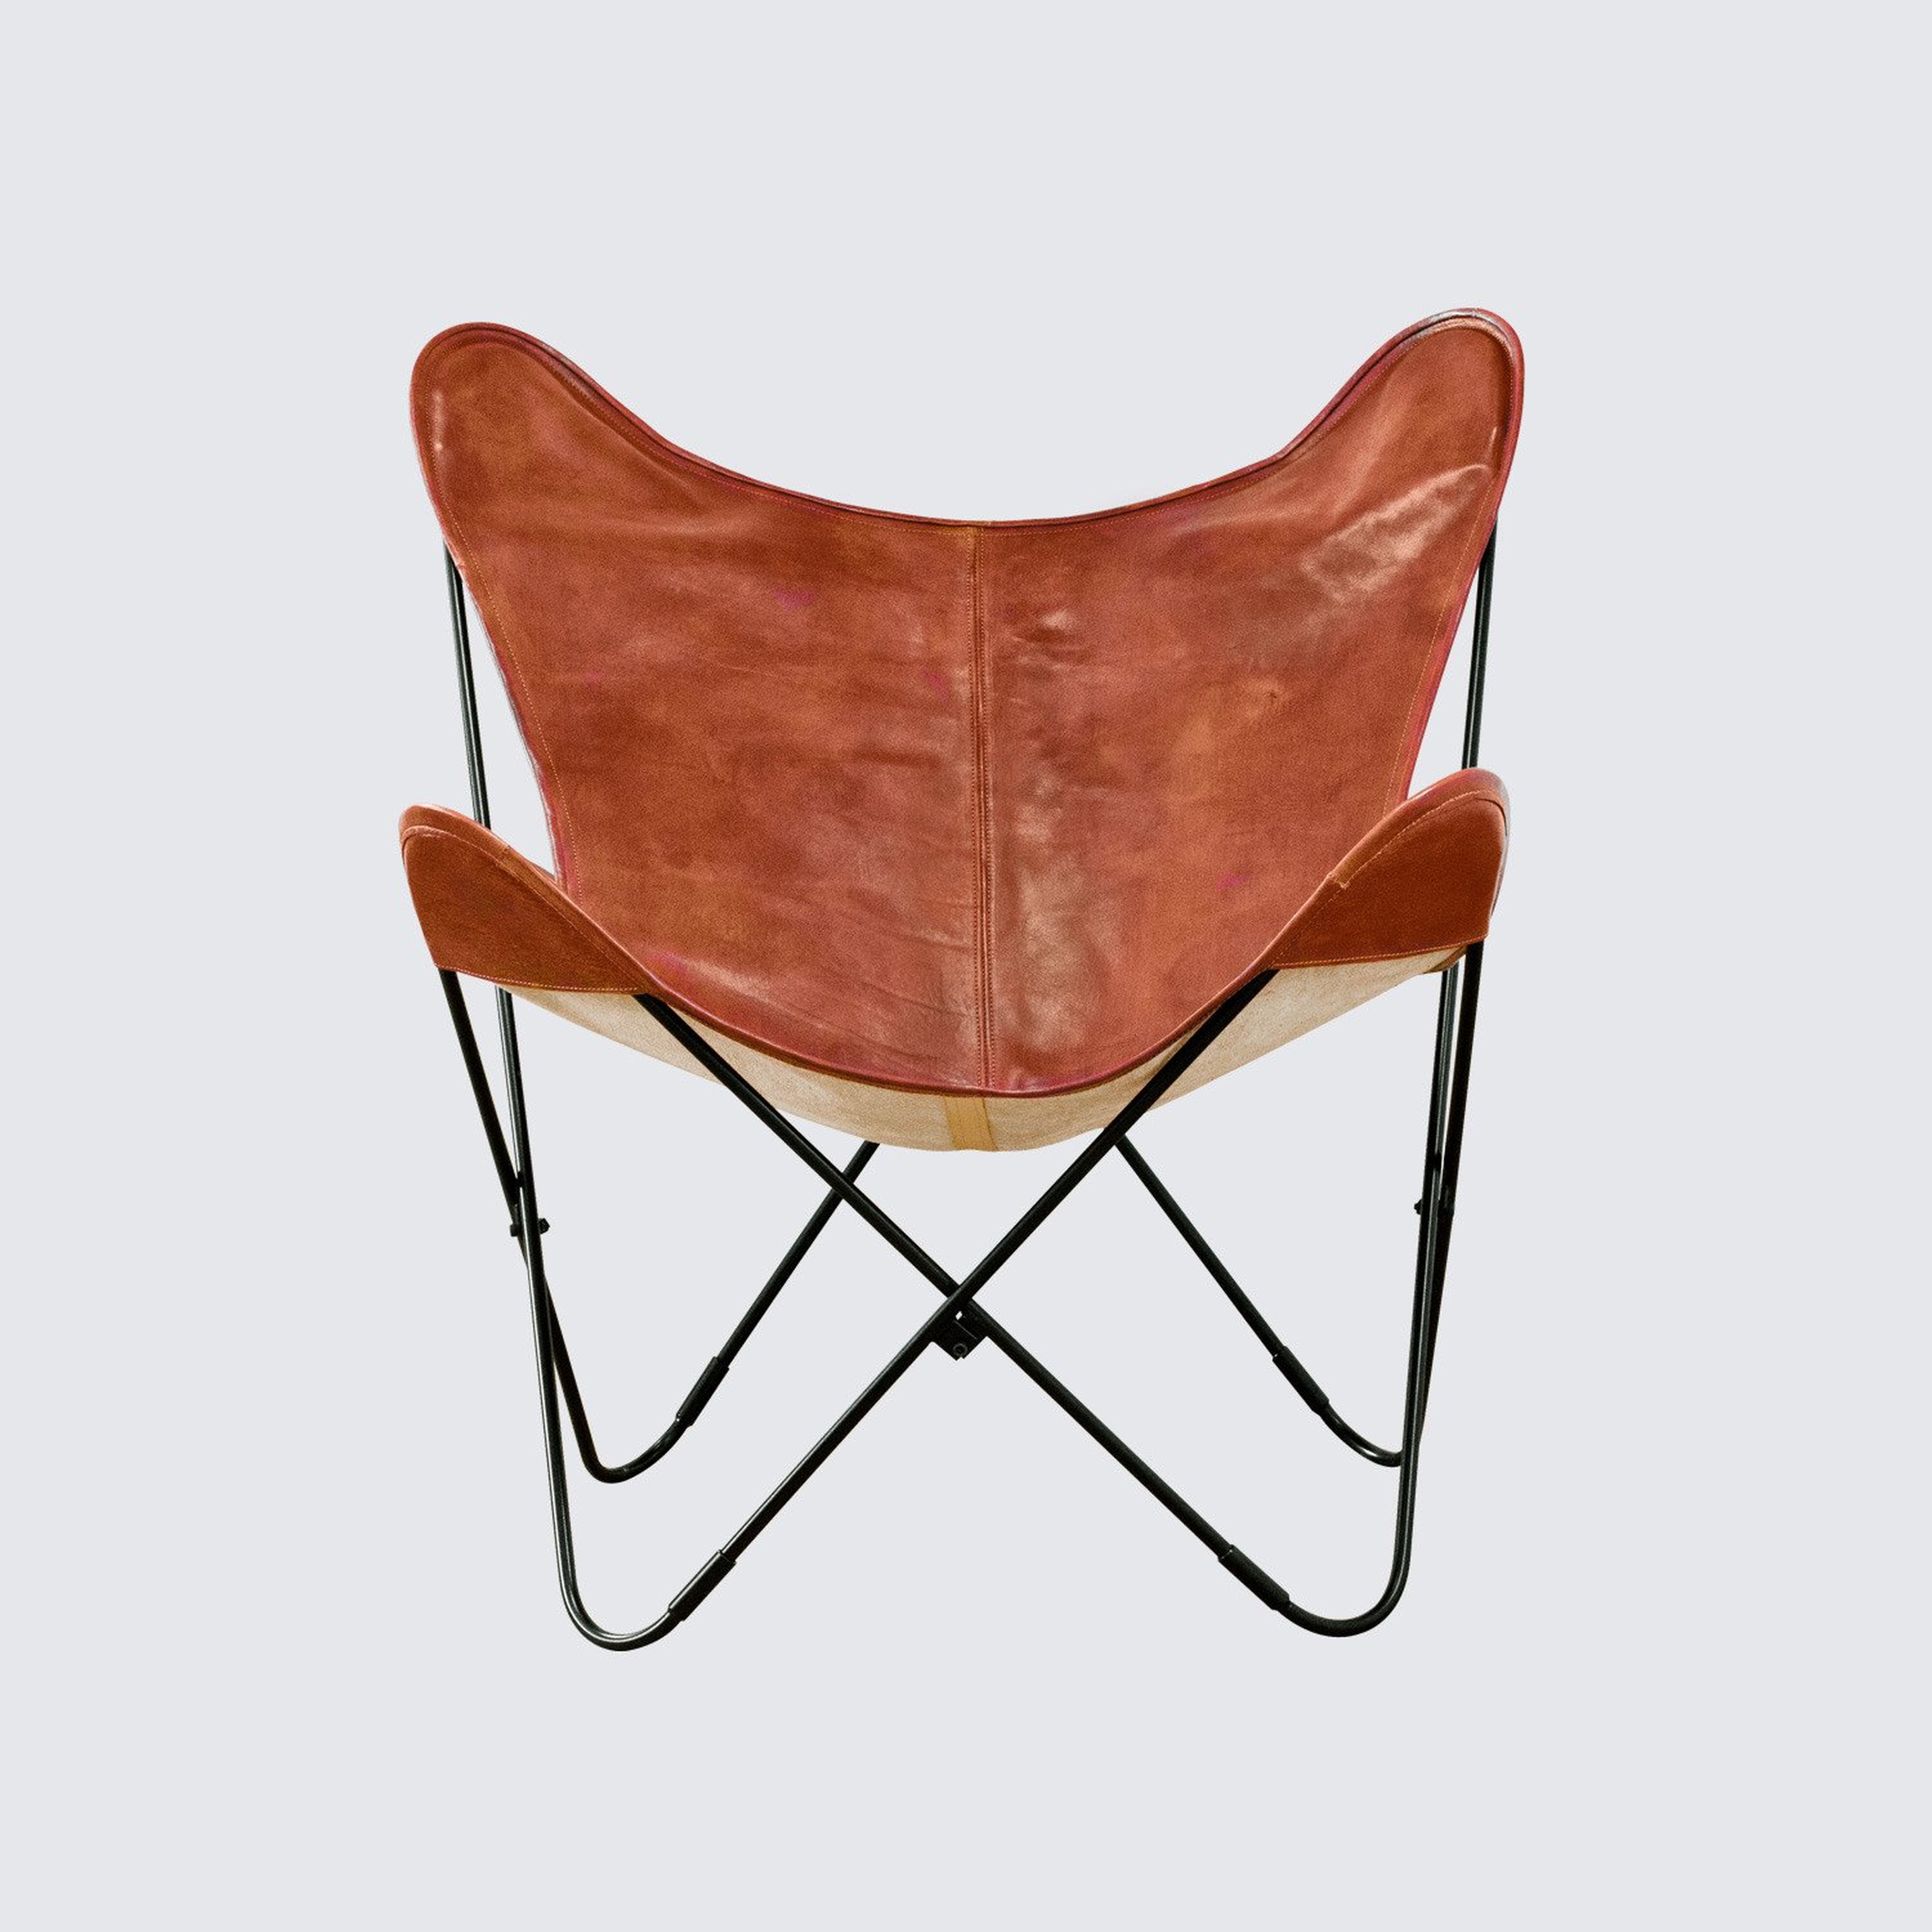 Palermo Butterfly Chair  Black & Cognac By The Citizenry - The Citizenry